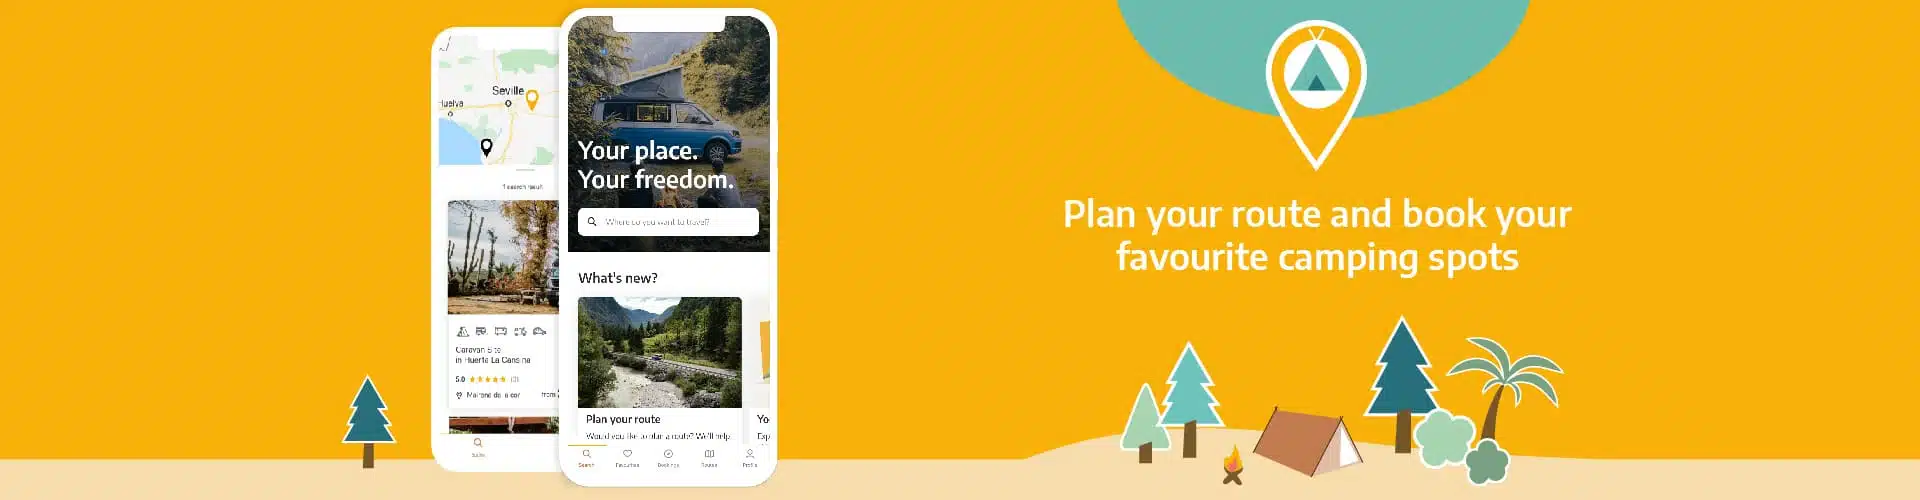 Plan your route and book your favourite camping spots